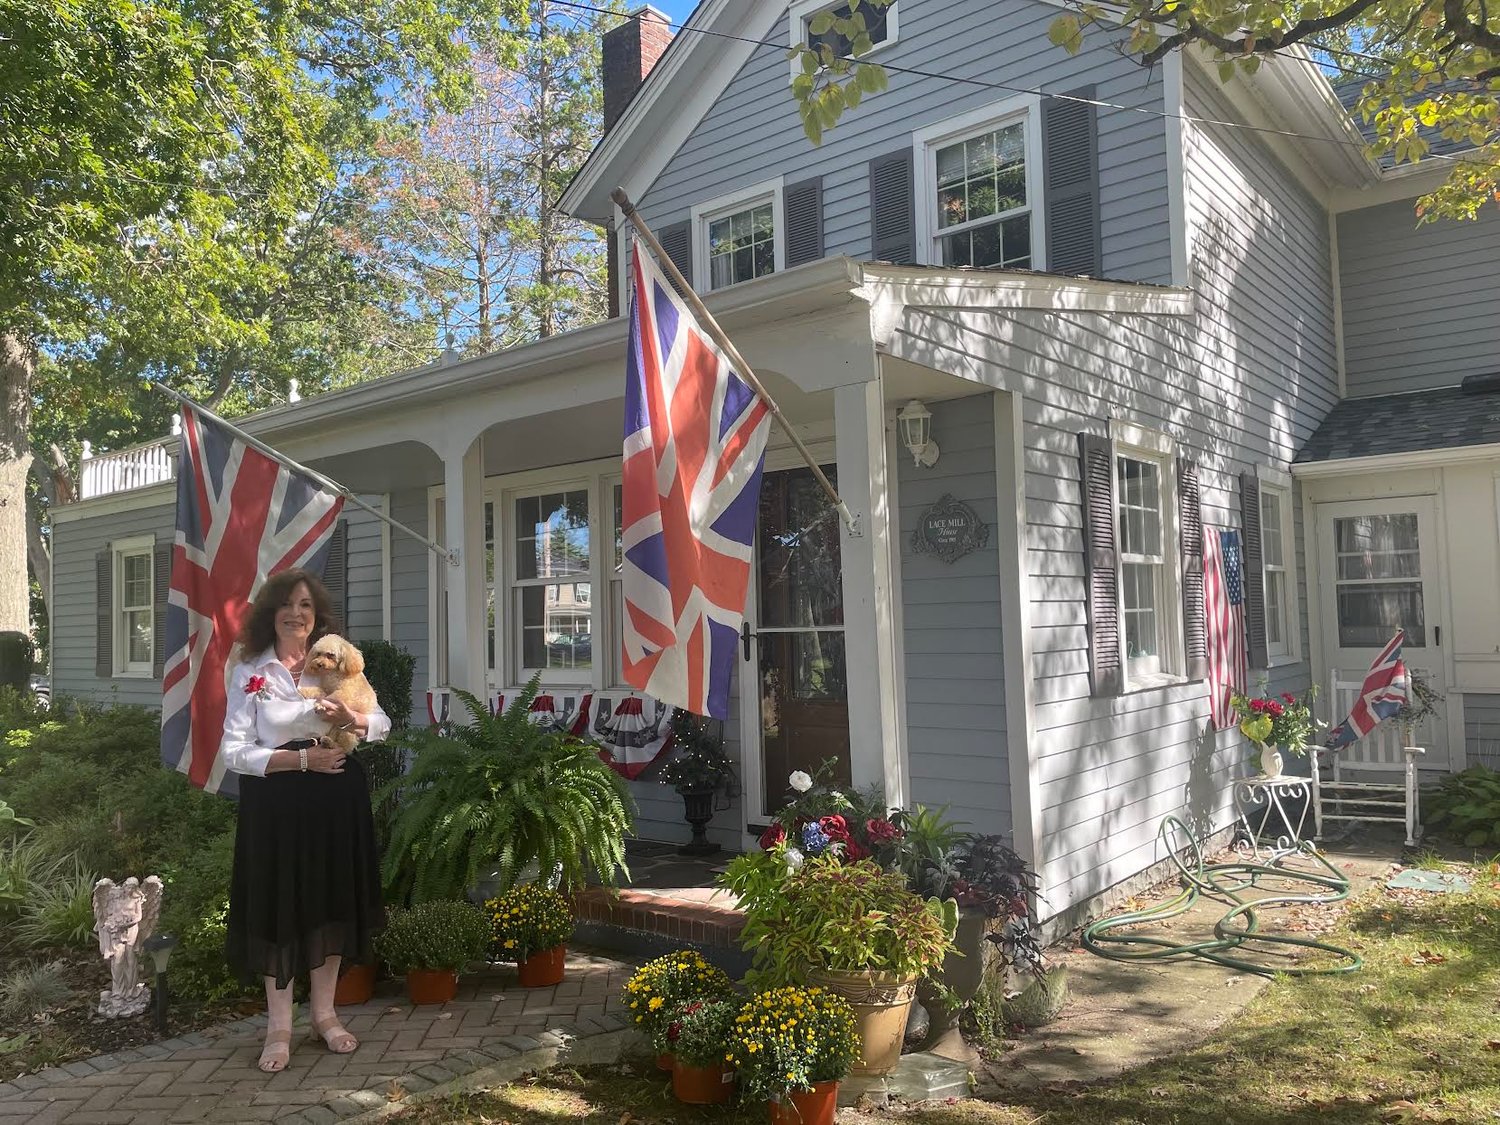 Pictured is England native Penelope Grippo, 77, outside her decorated home in honor of the queen at 99 Lake Shore Drive in Patchogue with her dog Paddington the toy poodle. She is sporting her crystal-adorned red poppy on her chest in honor of her late father who gave it to her to match the queen’s diamond-adorned poppy.